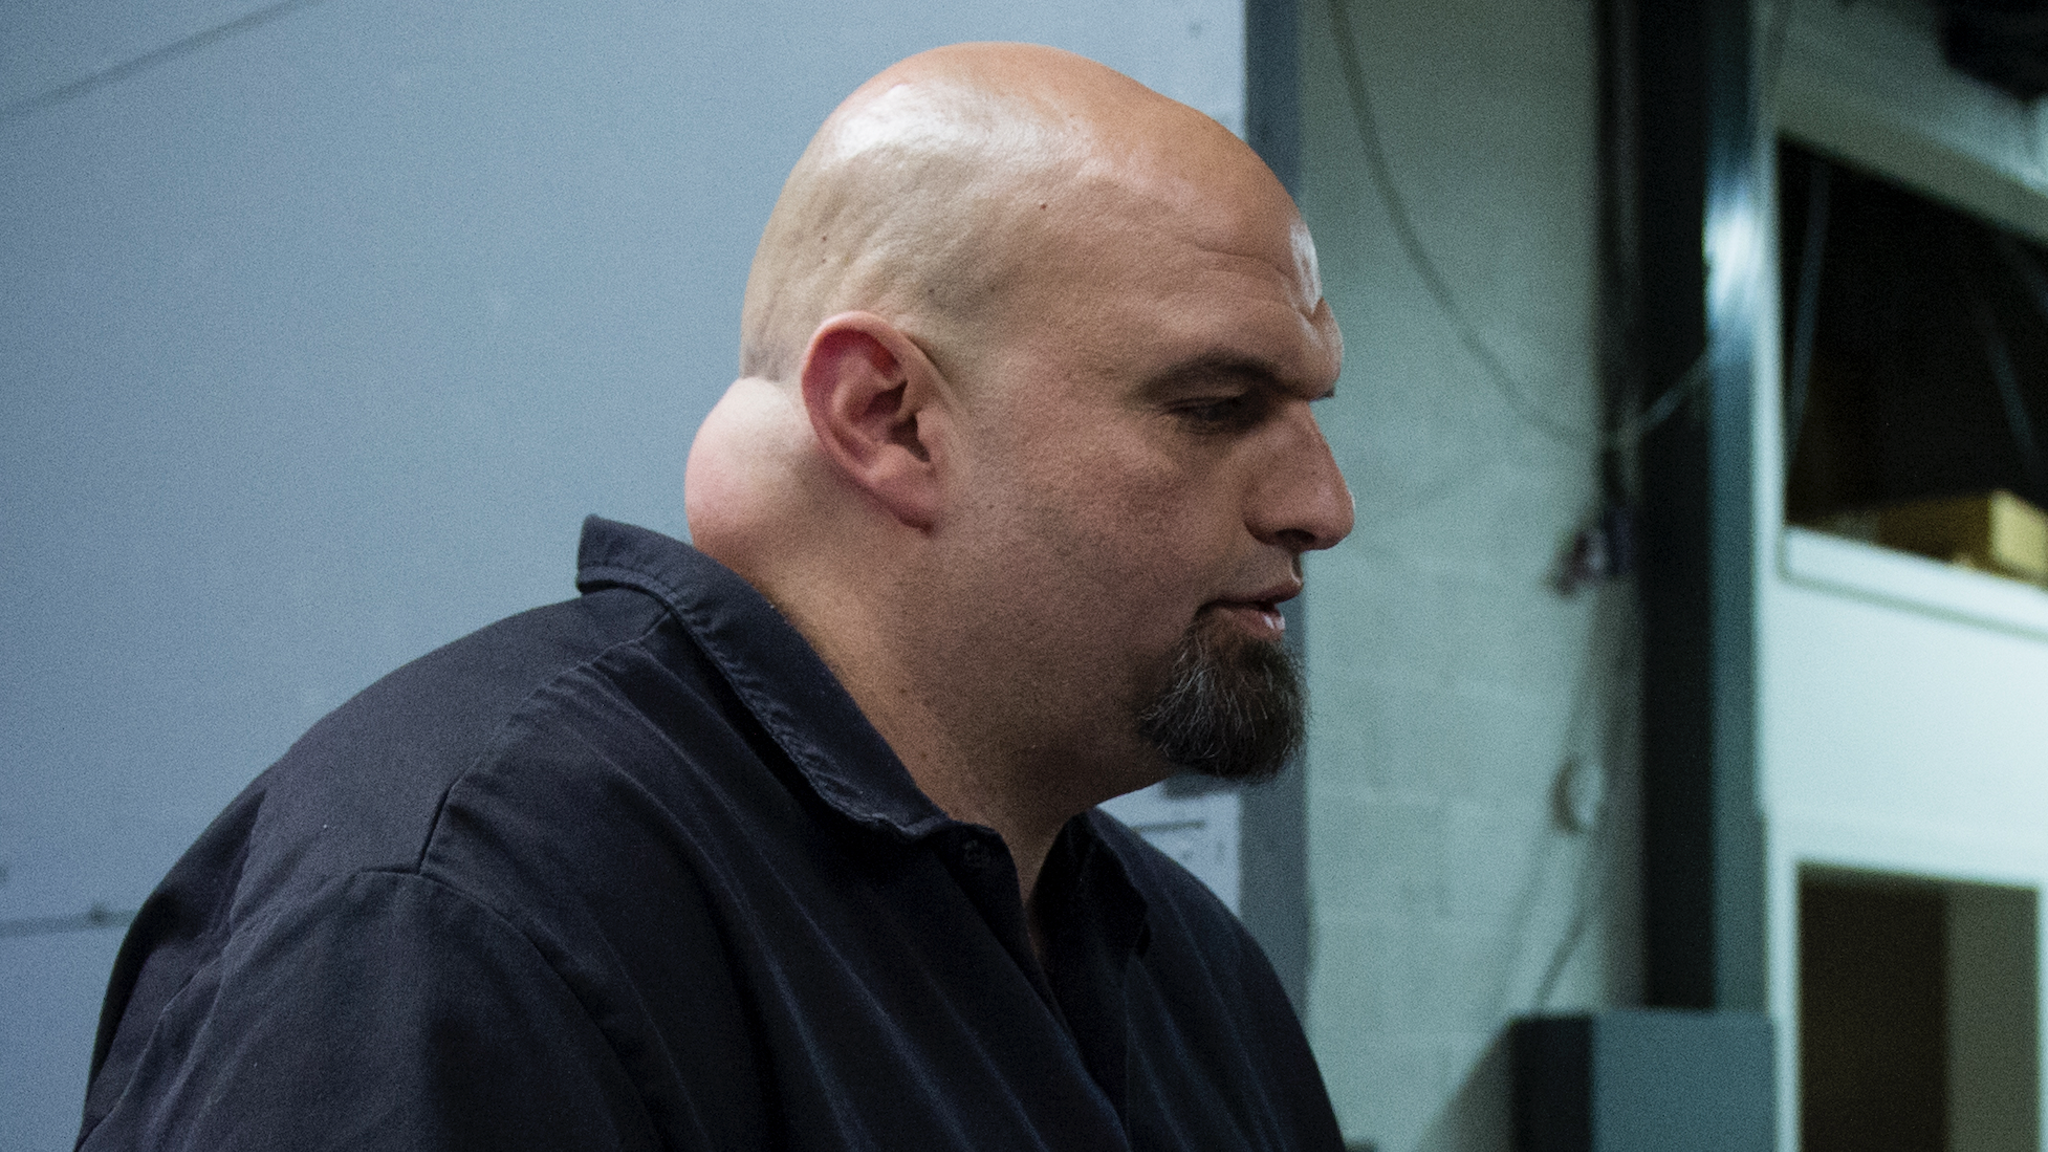 UNITED STATES - APRIL 5: Braddock, Pa., Mayor John Fetterman, left, speaks ormer Rep. Joe Sestak following their televised Senate Democrats primary debate with Katie McGinty and at WTAE-TV in Pittsburgh on Tuesday, April 5, 2016. One of the three Democrats will be selected in the April 26th primary to run against Sen. Pat Toomey, R-Pa.